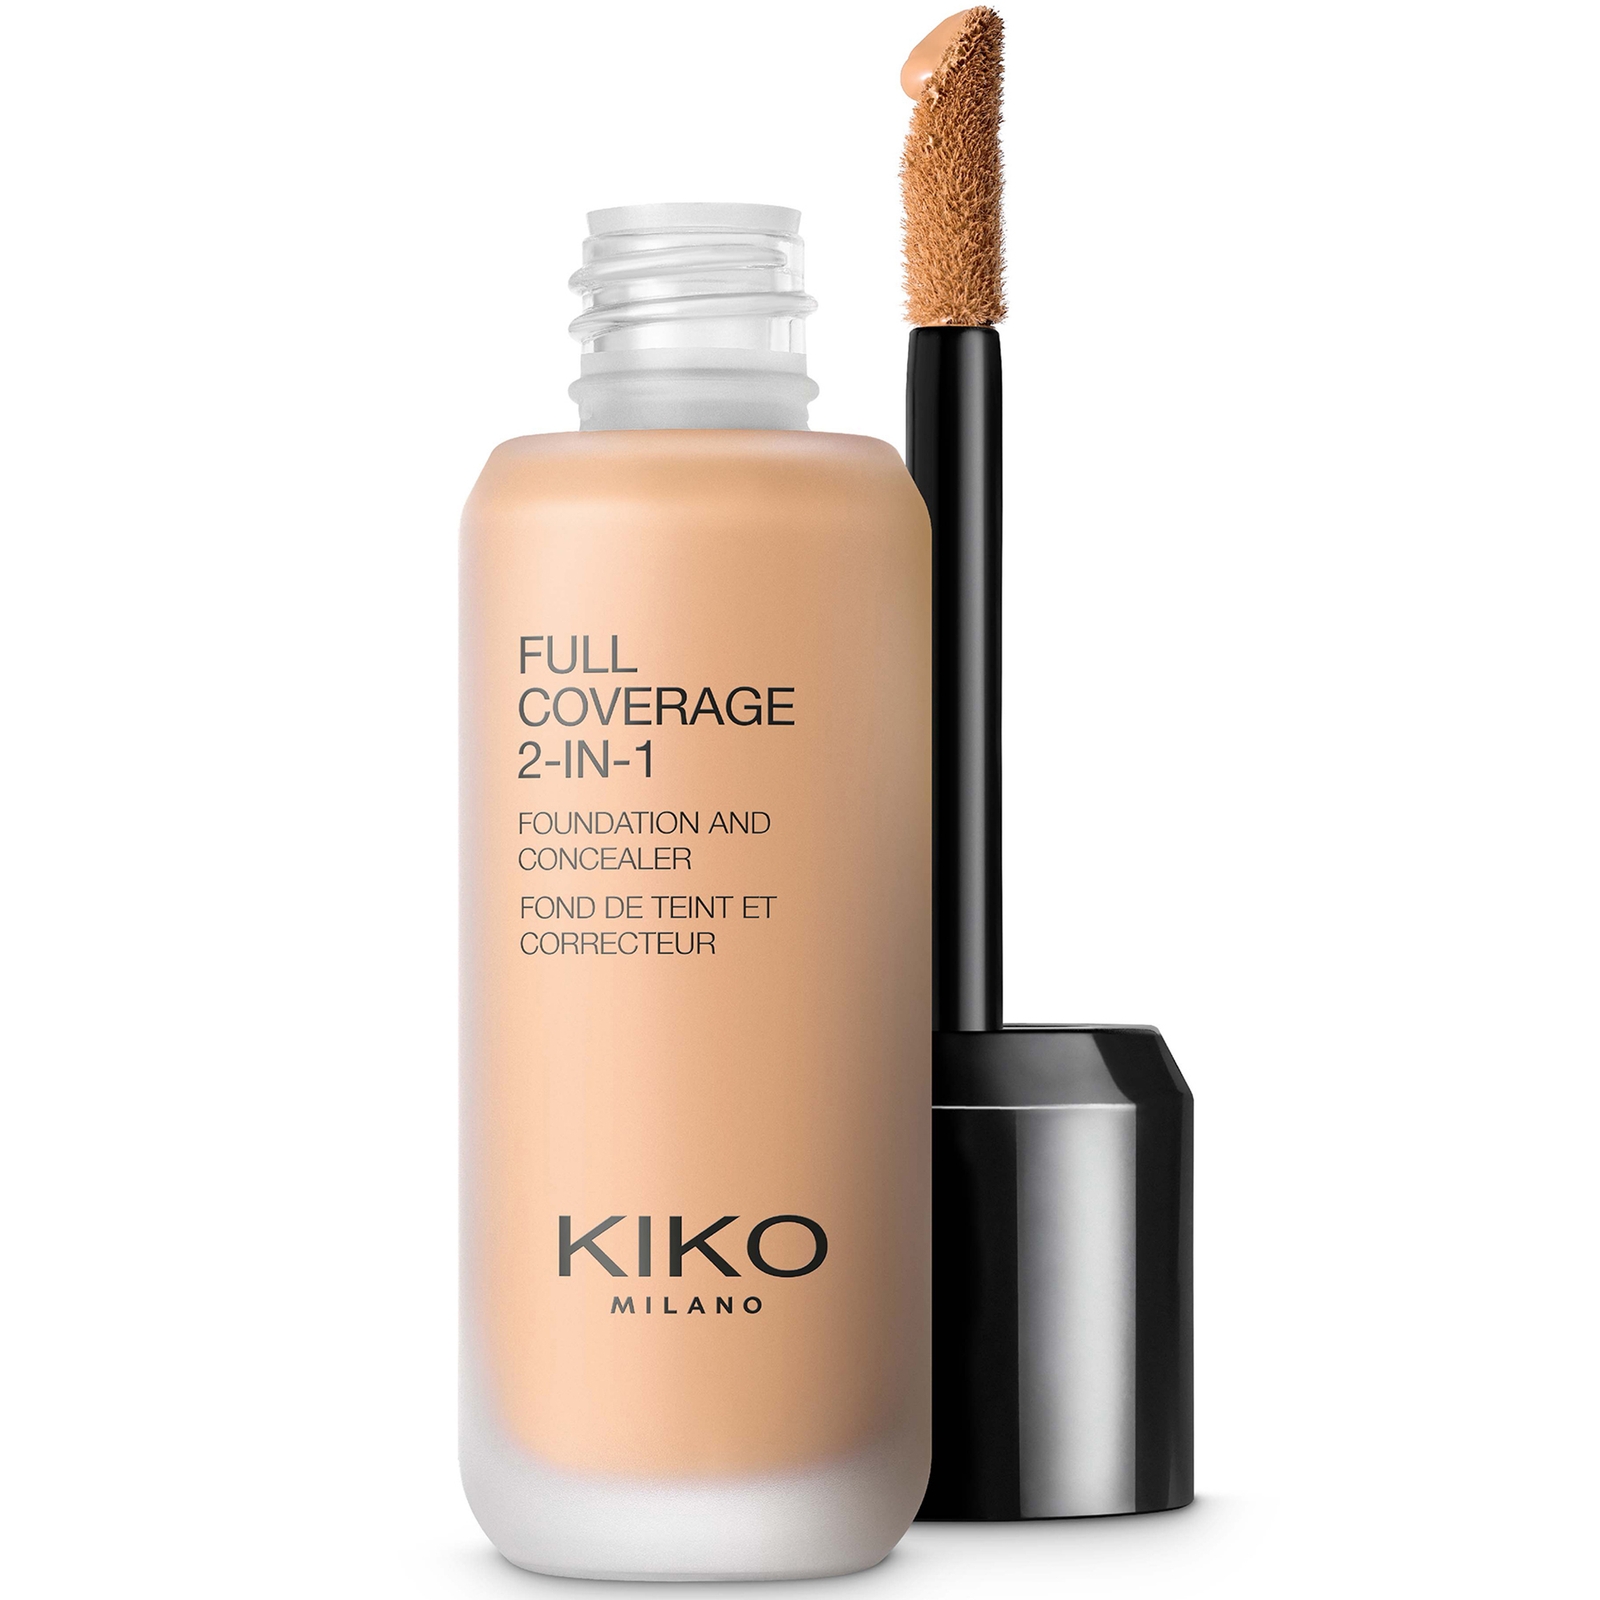 KIKO Milano Full Coverage 2-in-1 Foundation and Concealer 25ml (Various Shades) - 60 Warm Beige